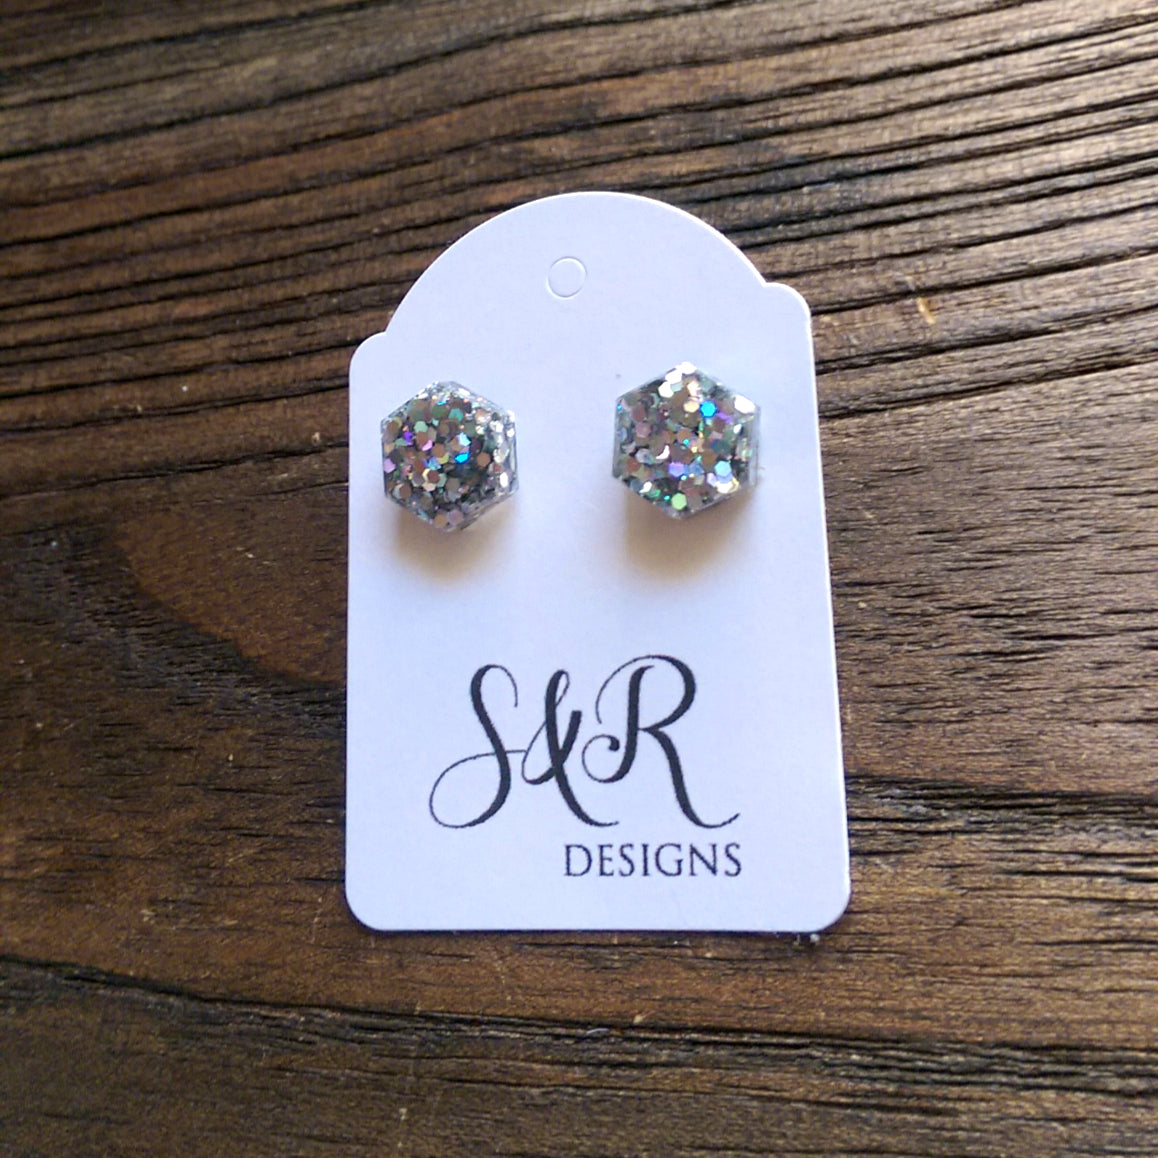 Hexagon Resin Stud Earrings, Holographic Silver Glitter Earrings. Stainless Steel Stud Earrings. 10mm - Silver and Resin Designs